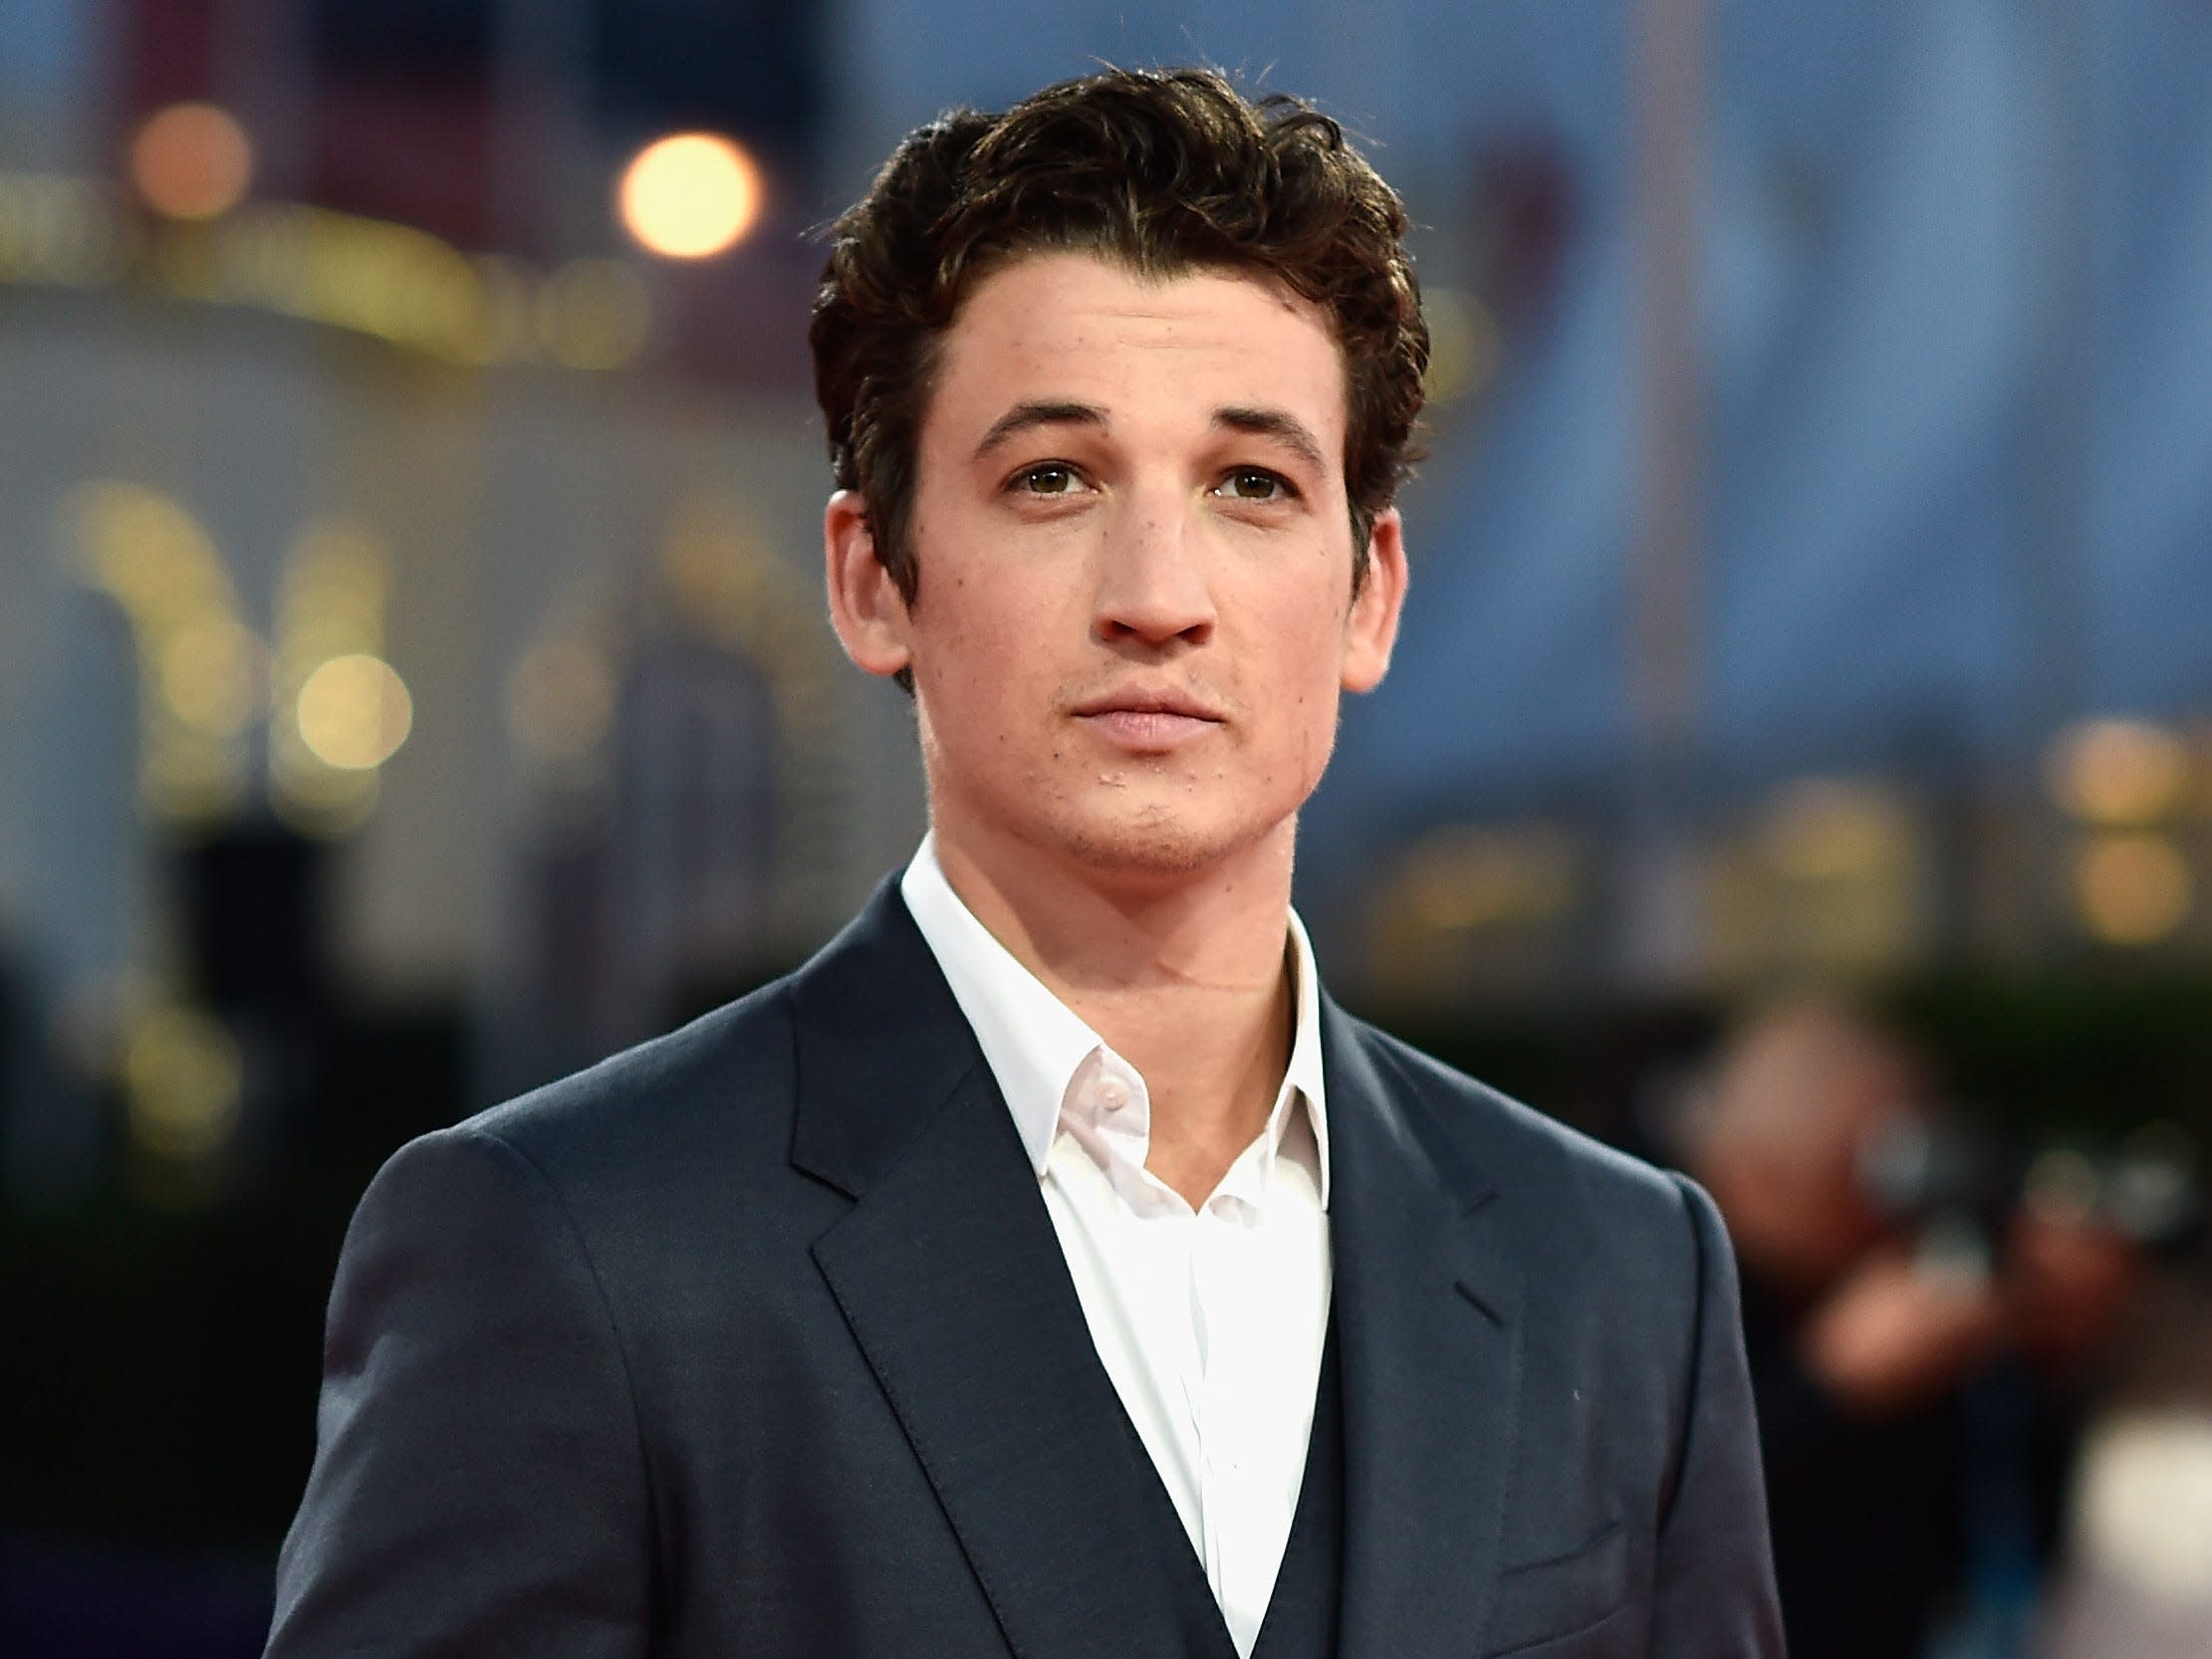 Miles Teller refused a vaccine then tested positive for COVID-19 while filming 'The Godfather' TV series, report says